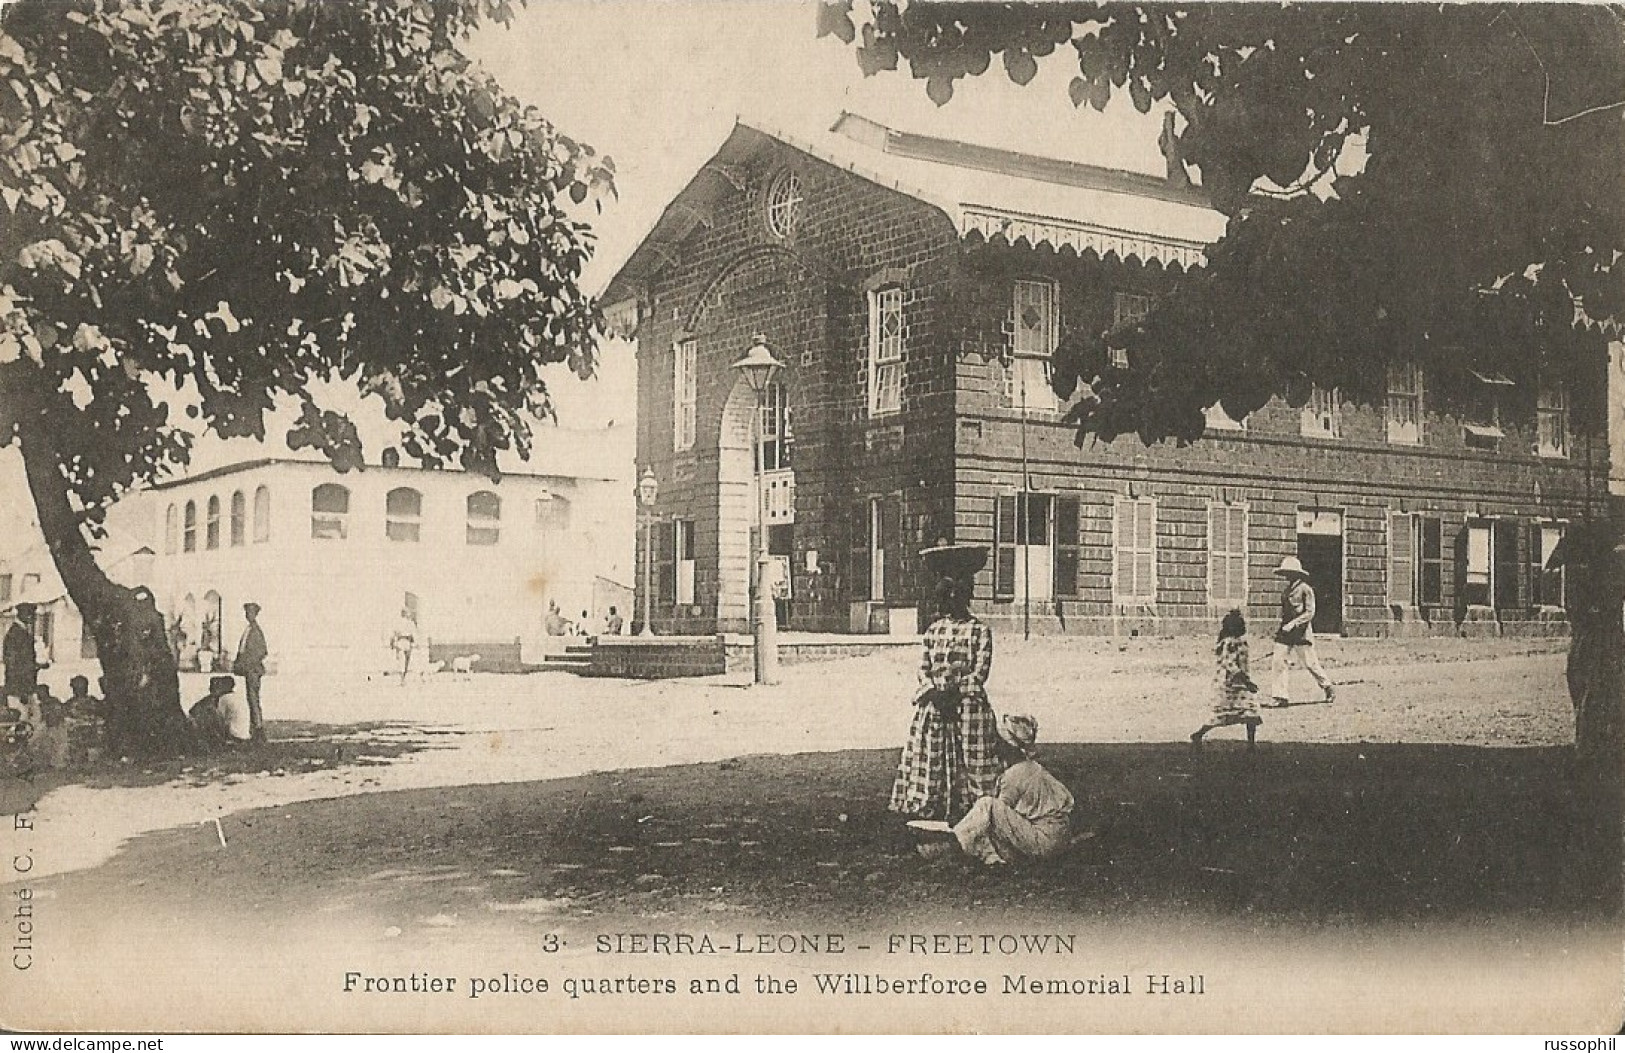 SIERRA LEONE - FREETOWN - FRONTIER POLICE QUARTERS AND THE WILBERFORCE MEMORIAL HALL - CLICHE C.F.A.O. - 1908 - Sierra Leone